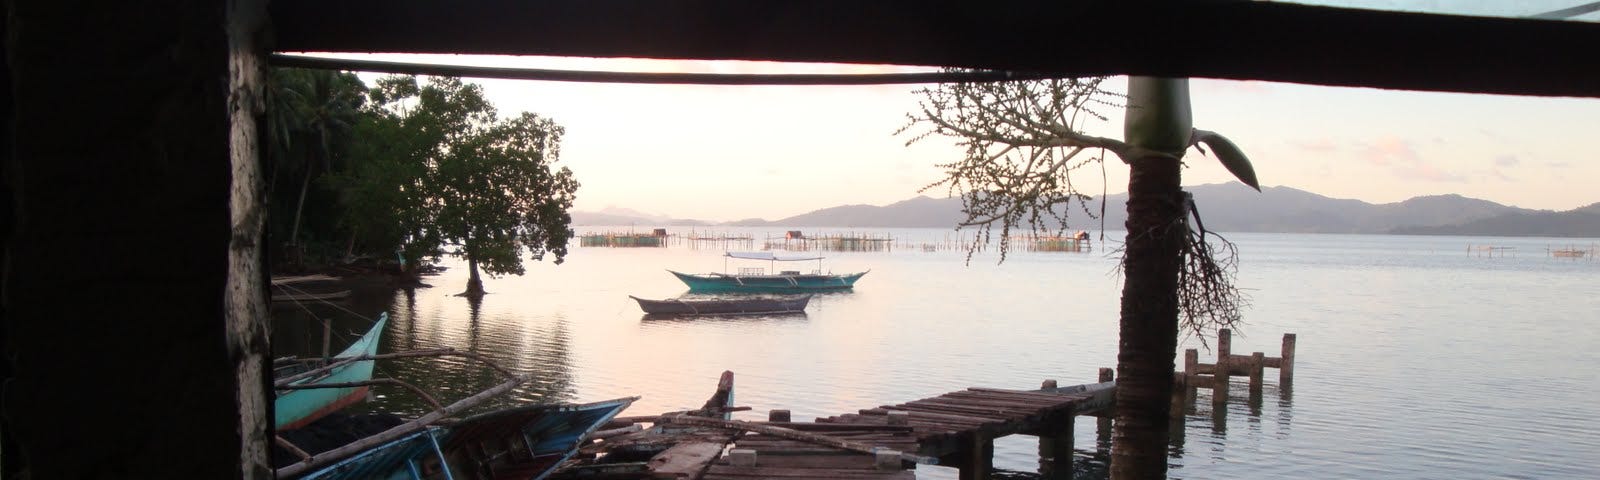 Looking through a window at a ramshackle dock and the sea with small outrigger fishing boats and big bamboo fishing structures scattered around